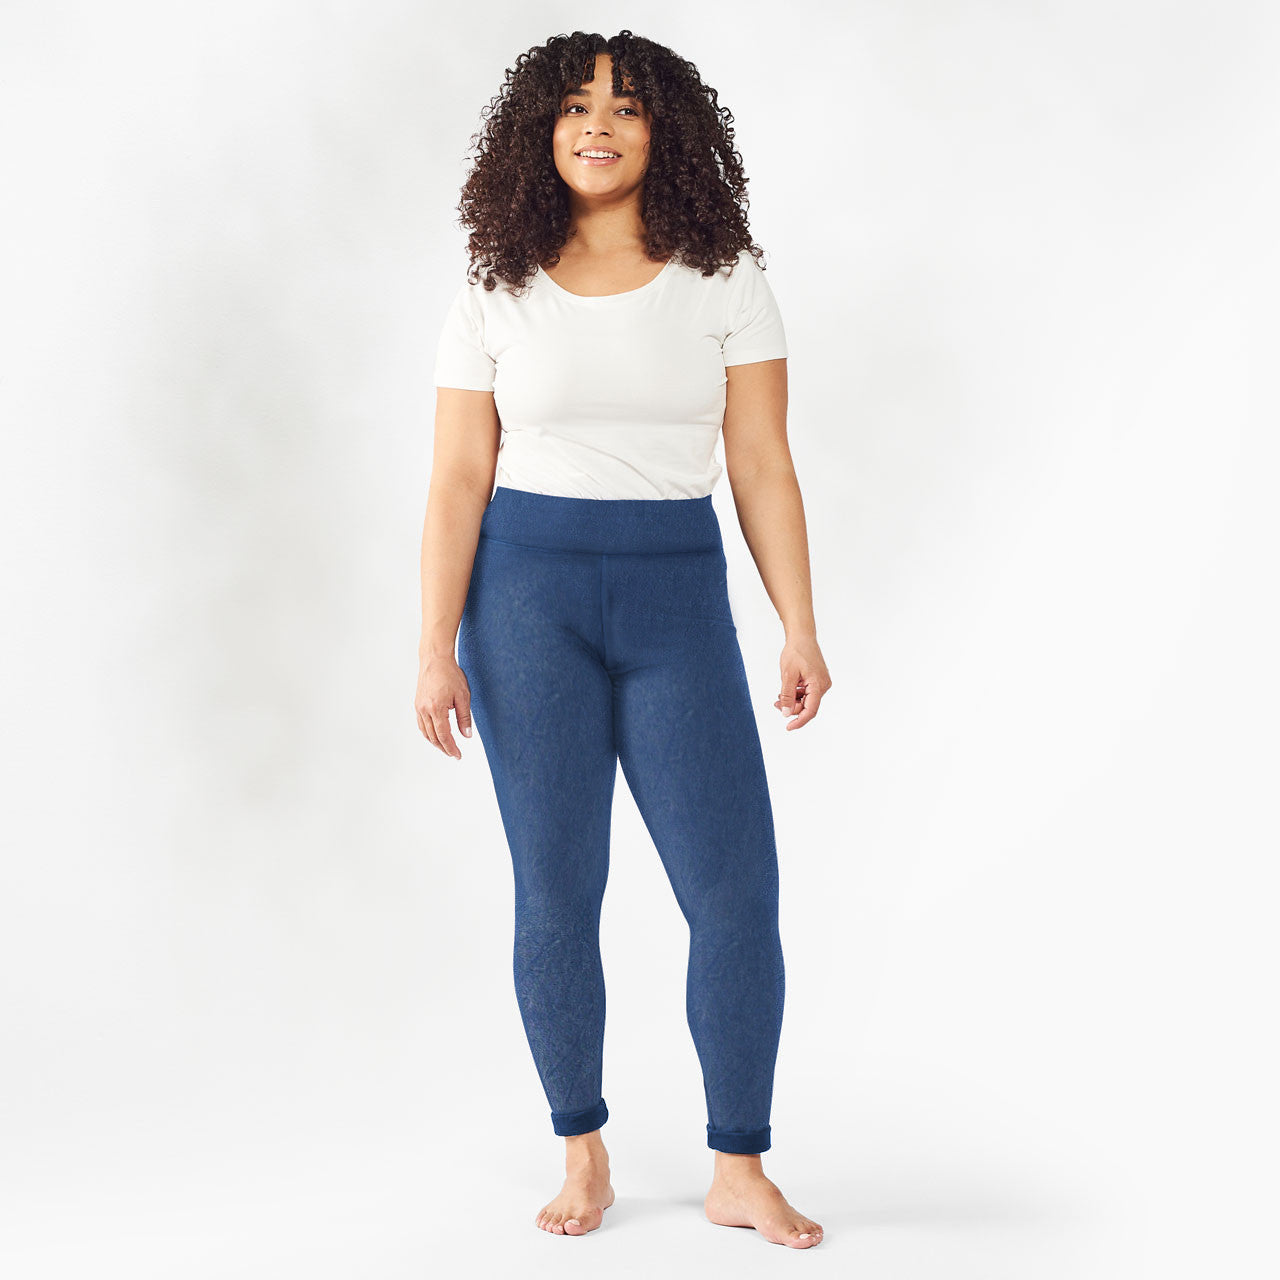  Maggie's Organic Fleece Leggings - Mid Waist Control Gym and  Everday Leggings (Regular, Small, Black) : Clothing, Shoes & Jewelry